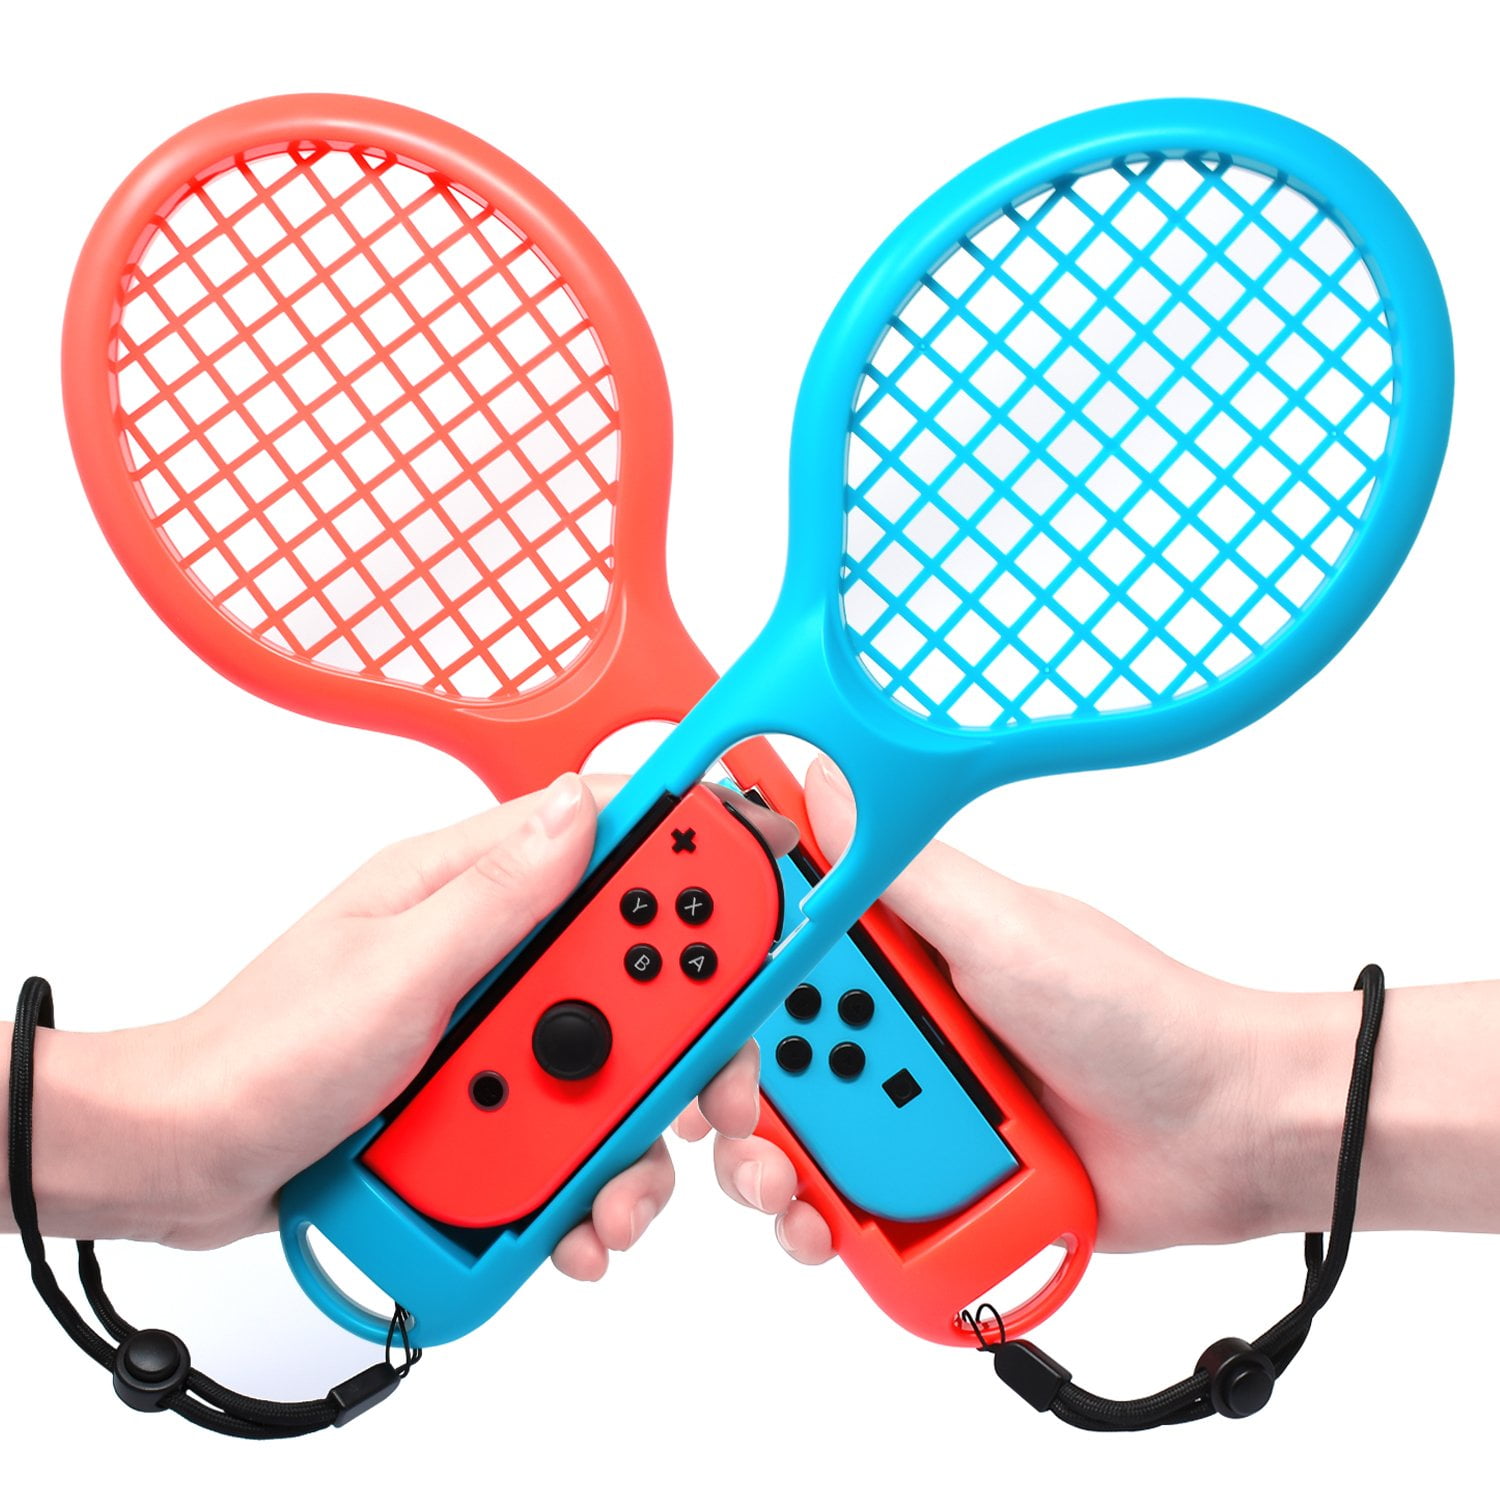 Tennis Racket for Nintendo Switch Joycon Controllers, Twin Pack